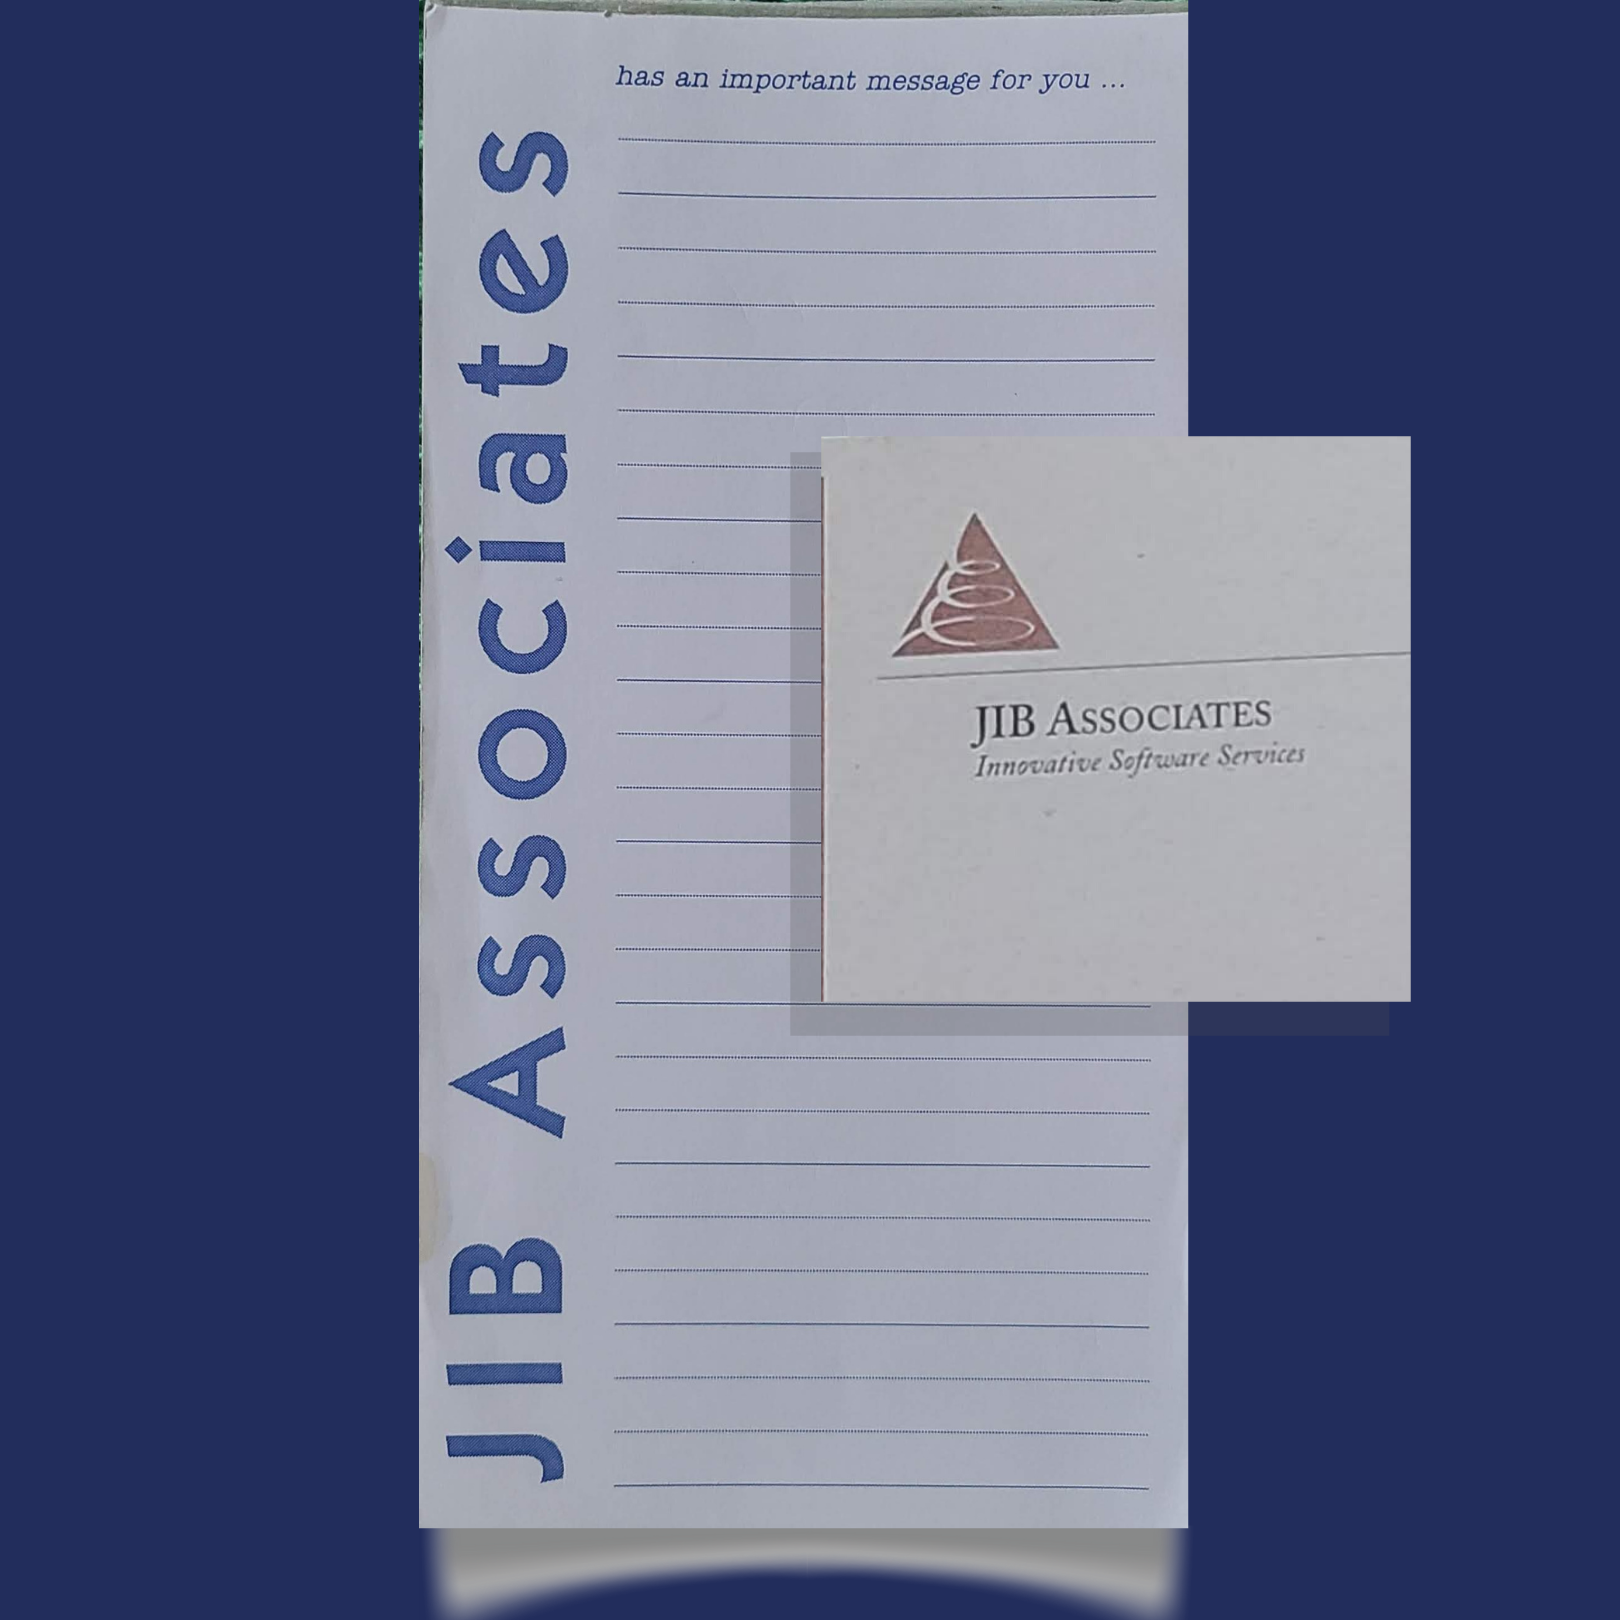 Stationery from JIB Associates, the original name for Inera